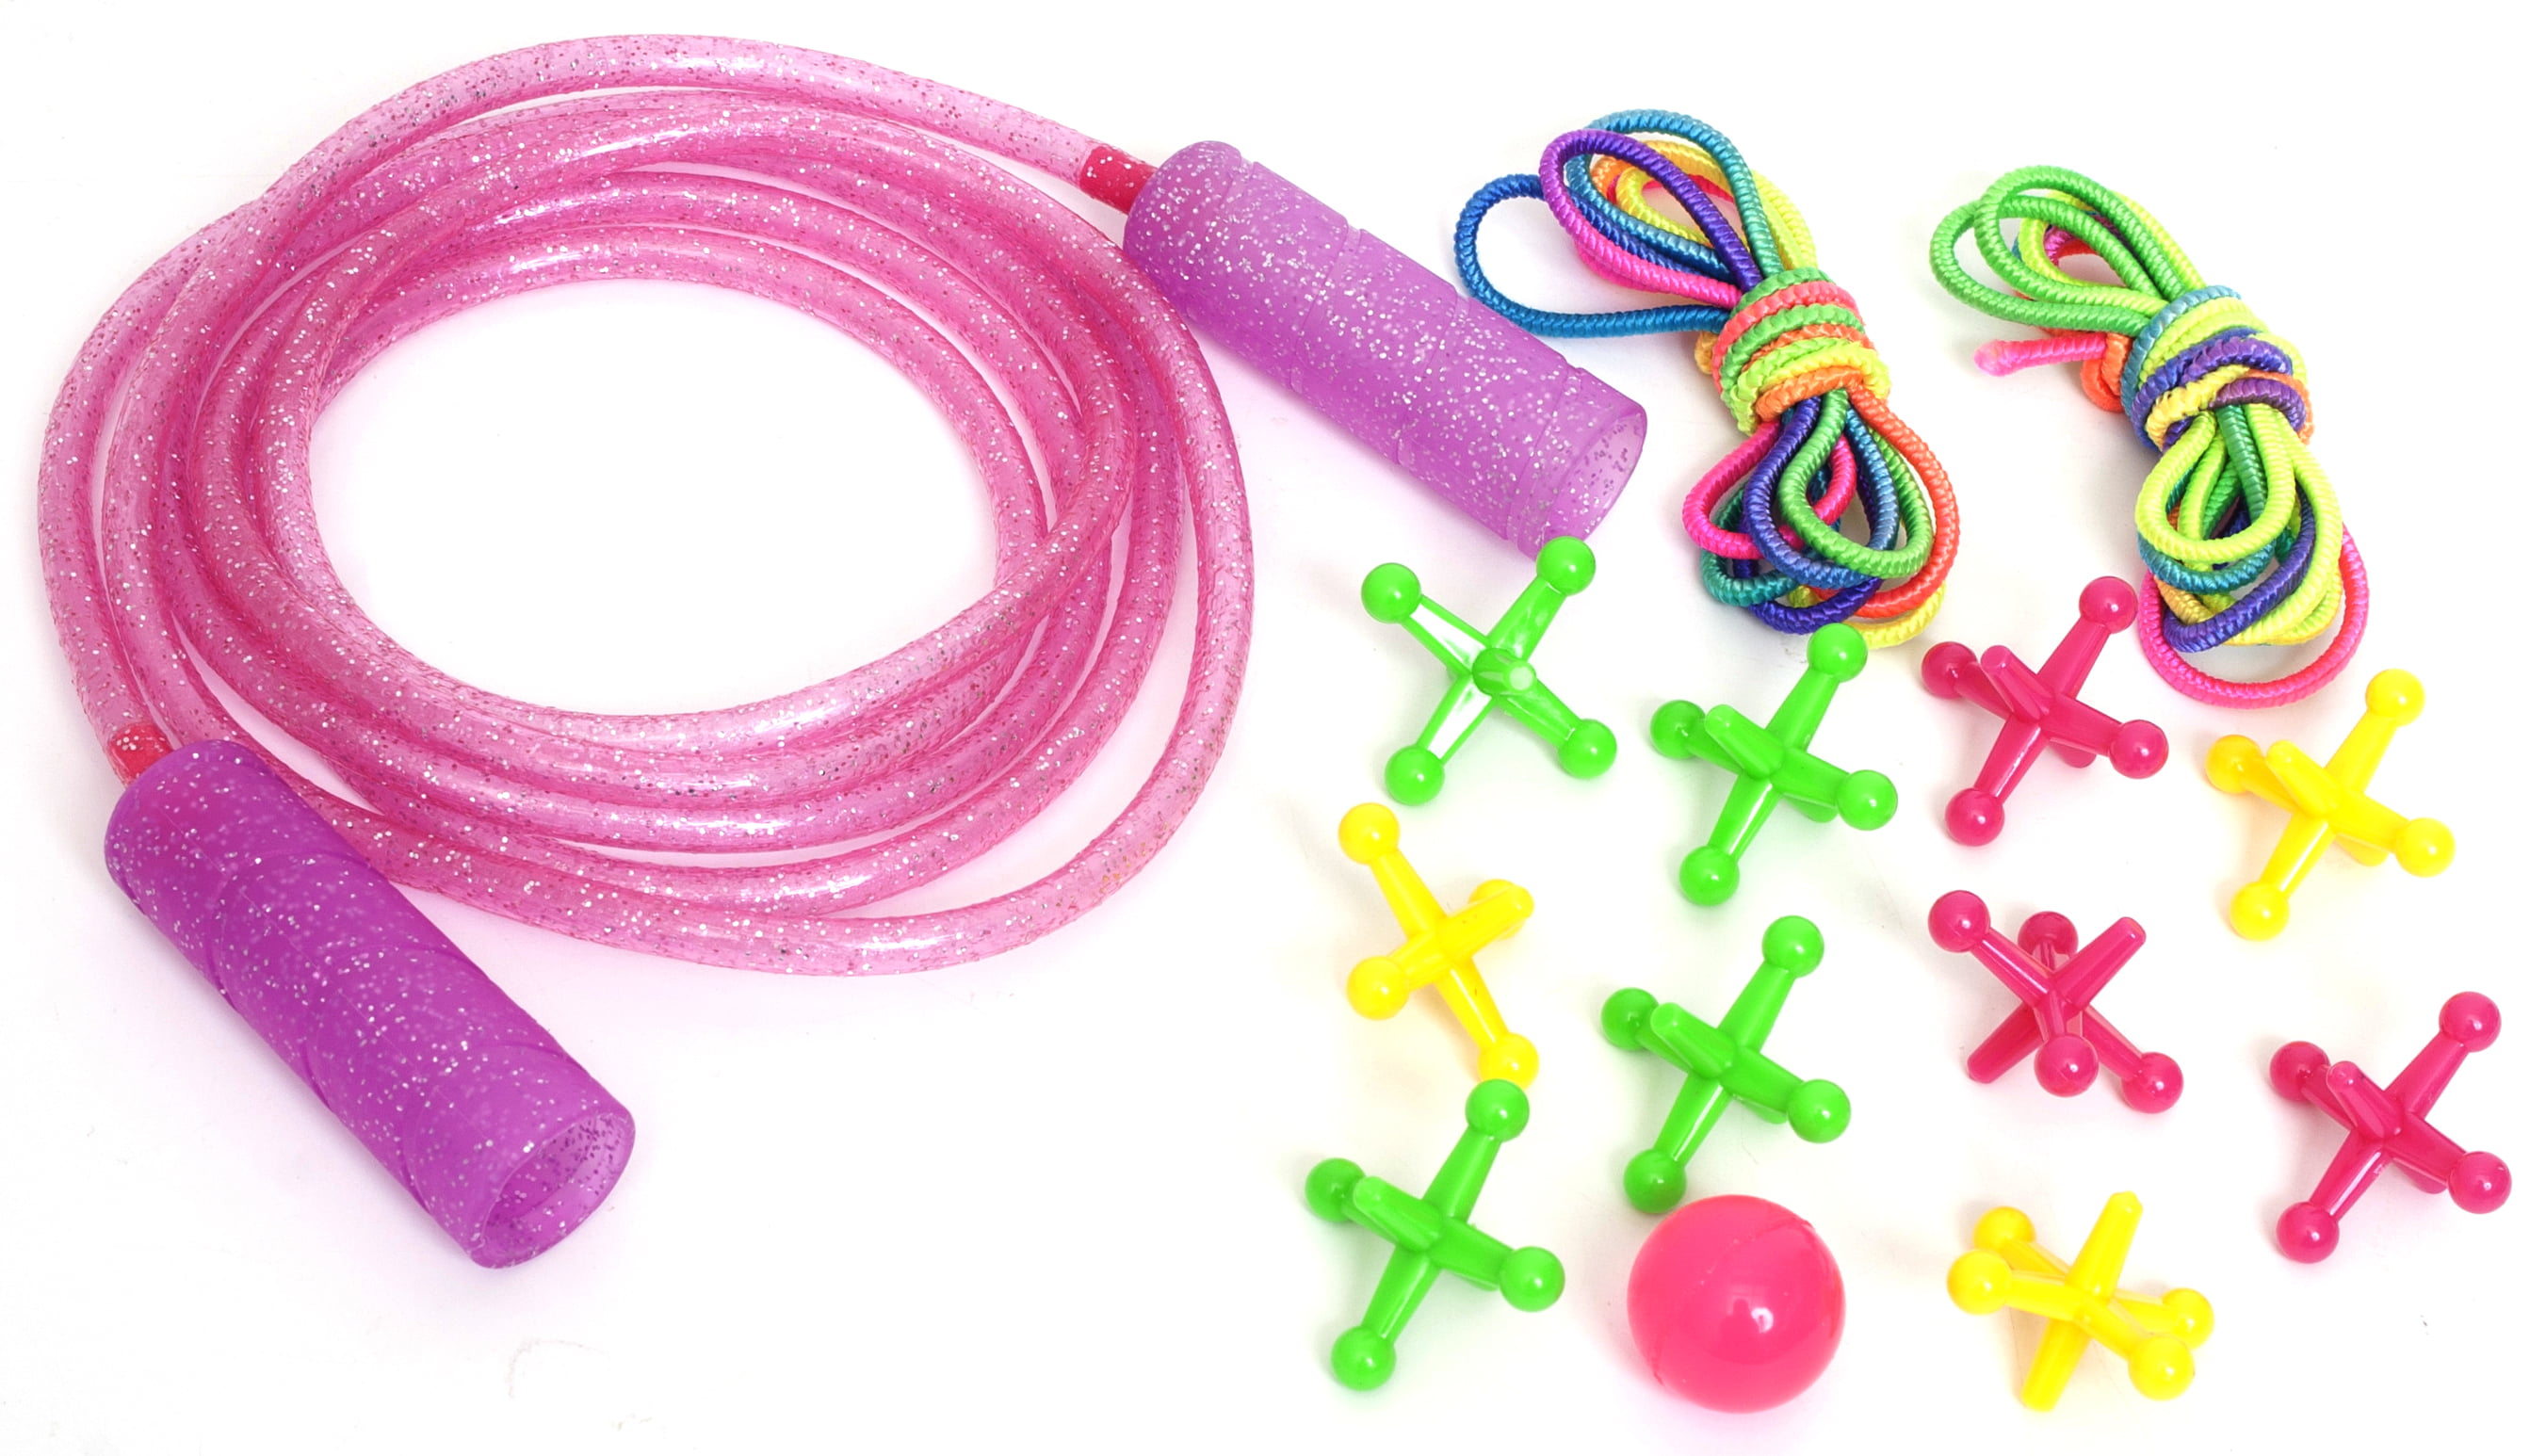 Chinese Jump Rope Jumprope Stretches to 7 feet x 5 feet Multicolor Party Favor 